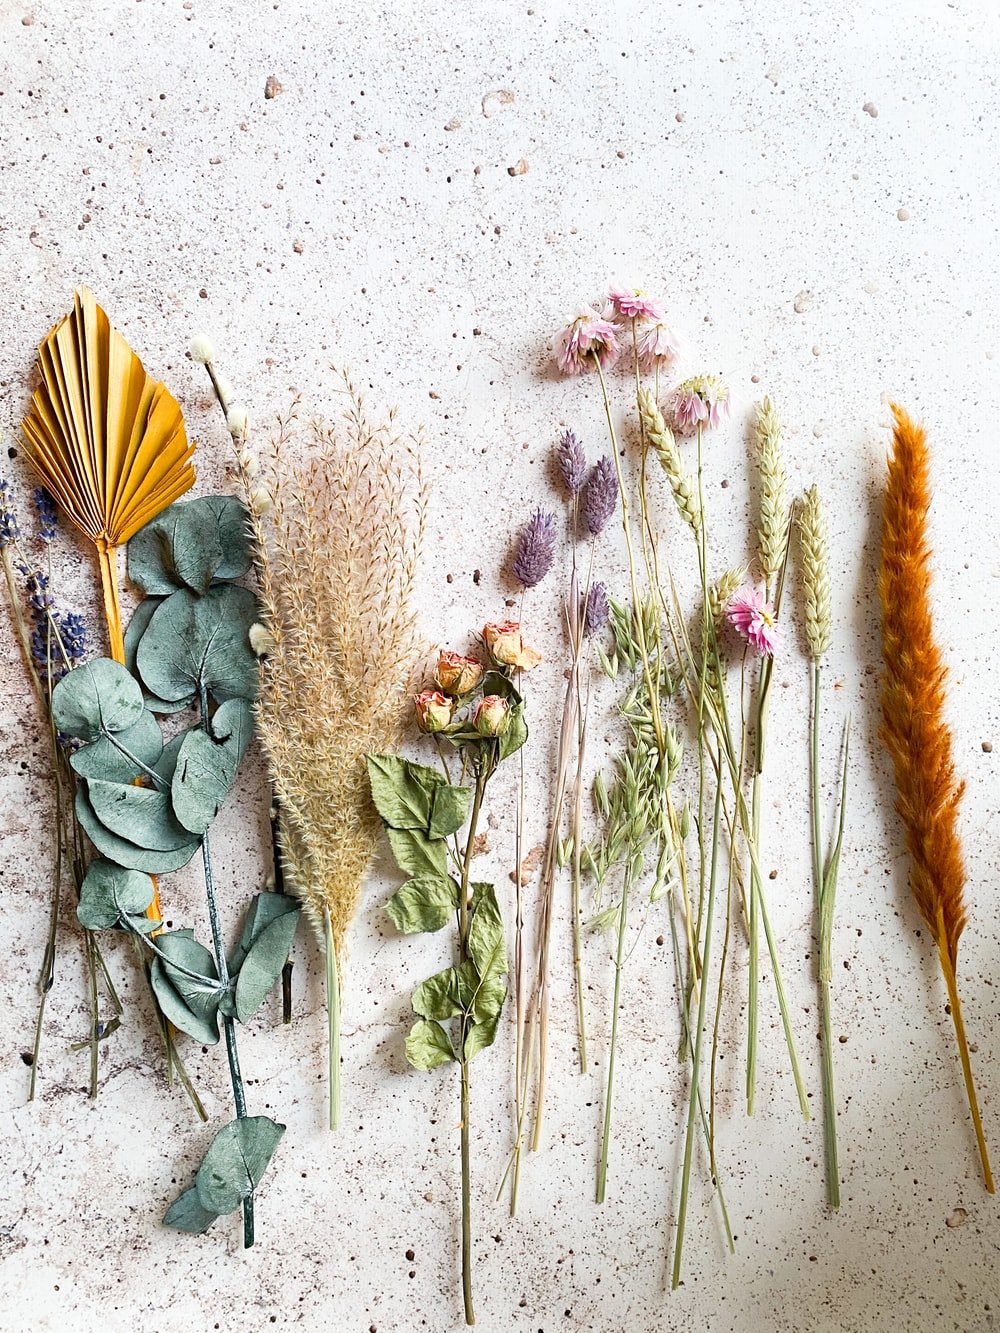 Dried Flowers Picture. Download Free Image